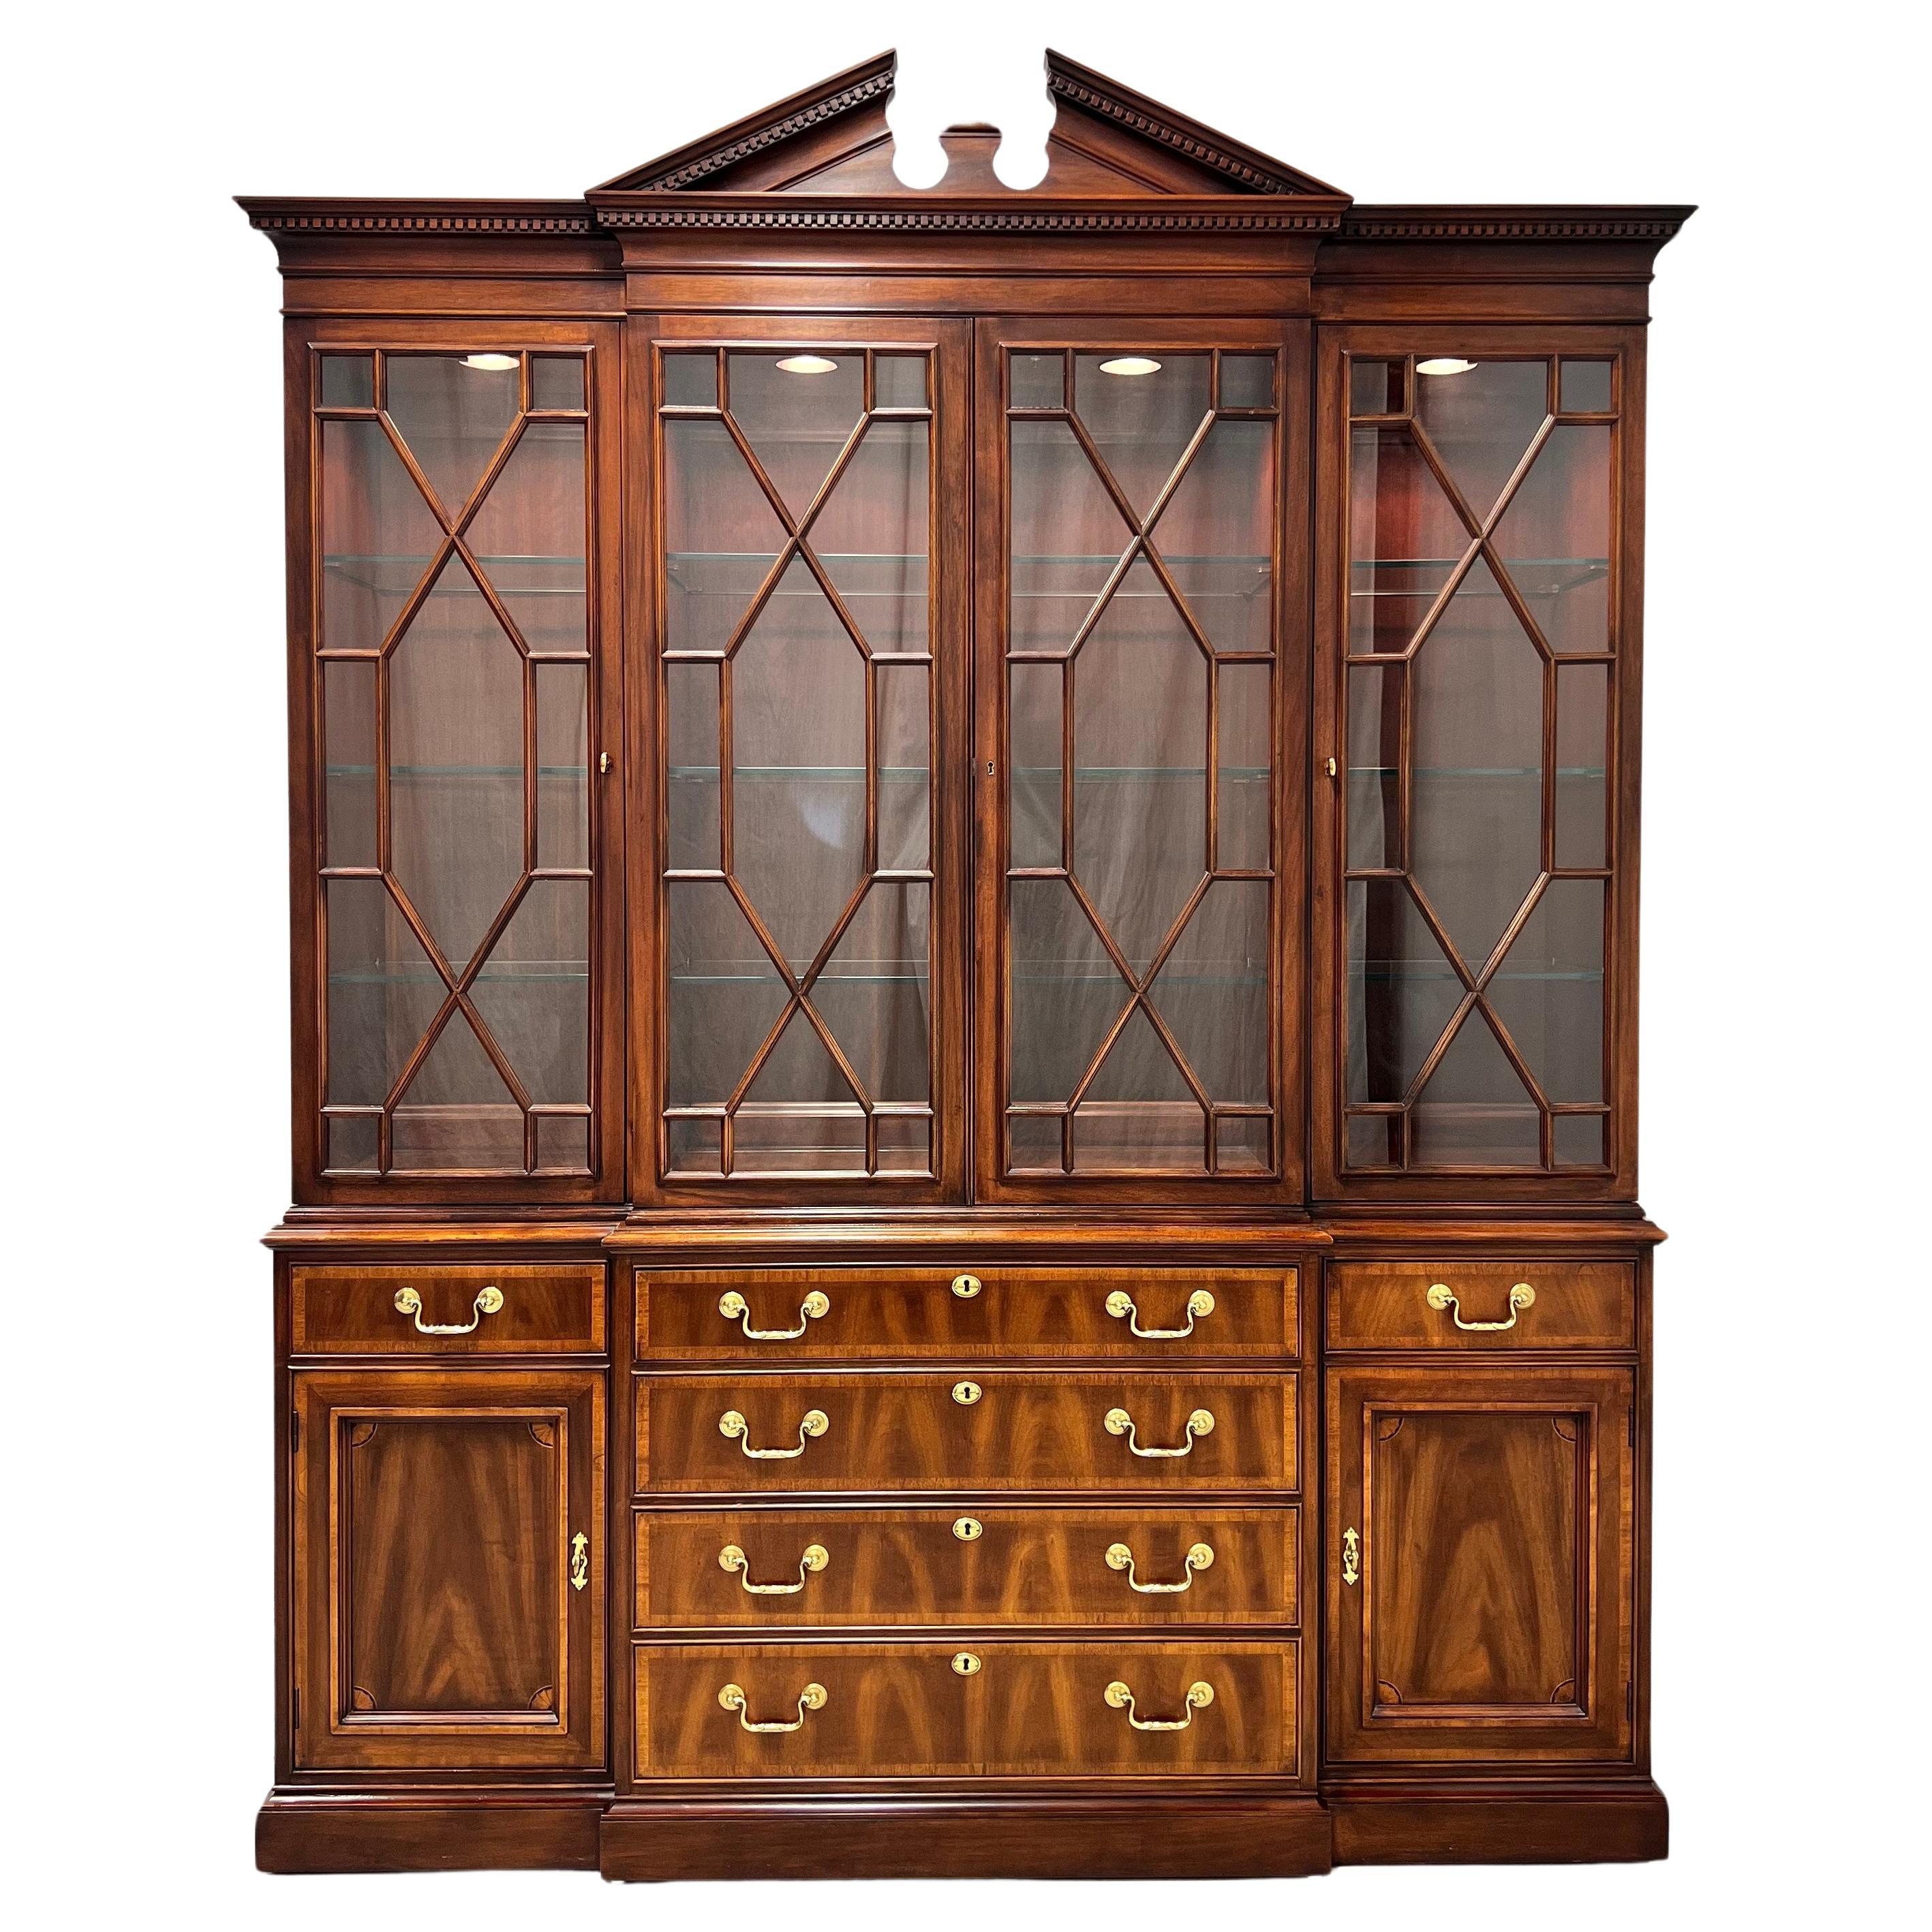 WHITE OF MEBANE Inlaid Banded Mahogany Chippendale Breakfront China Cabinet